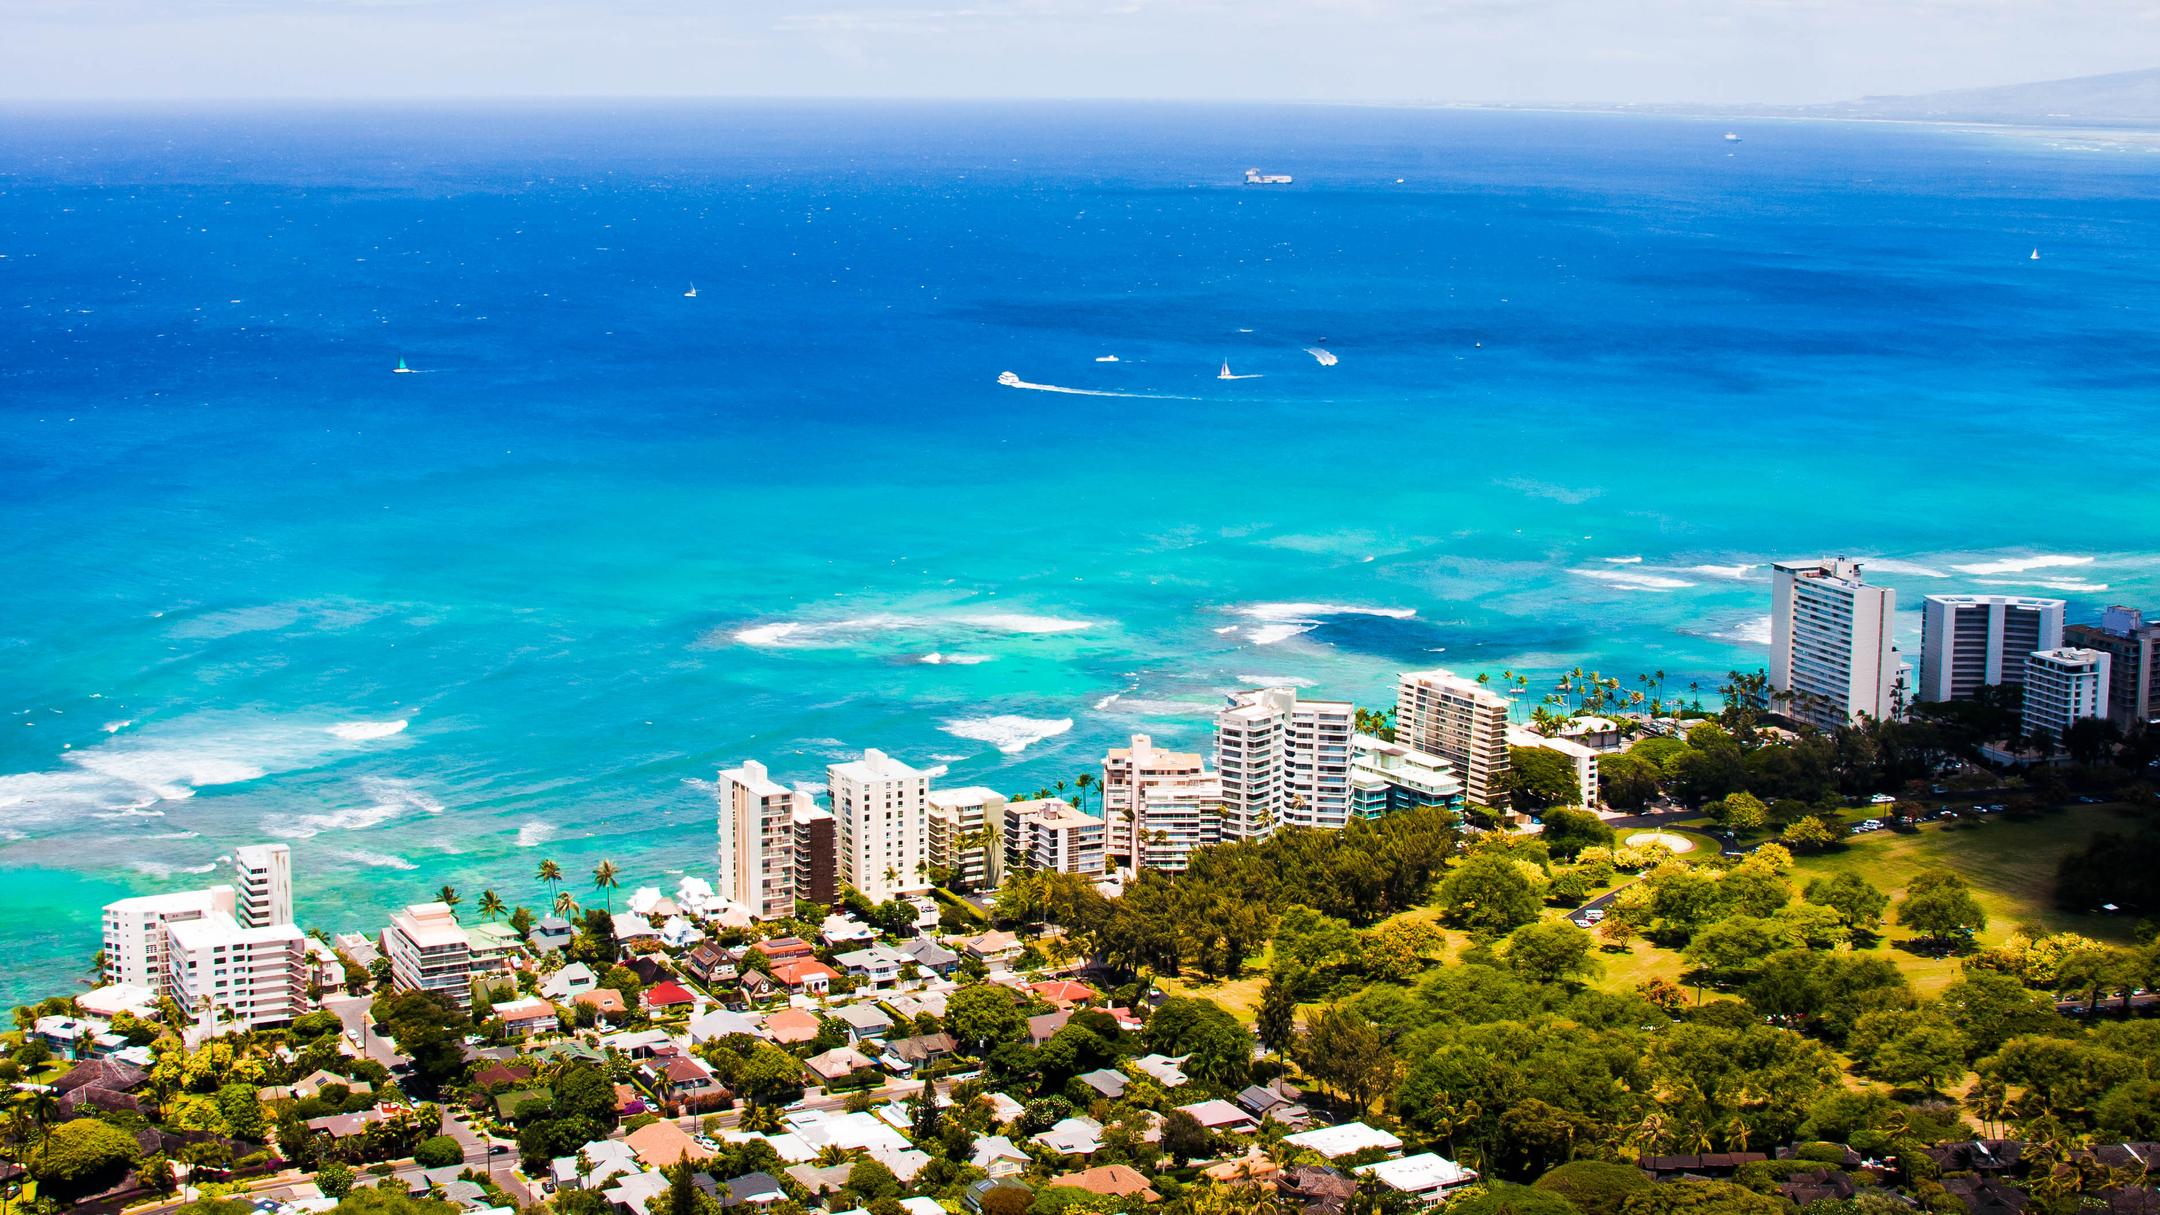 Car Rentals in Honolulu from $84/day - Search for Rental Cars on KAYAK